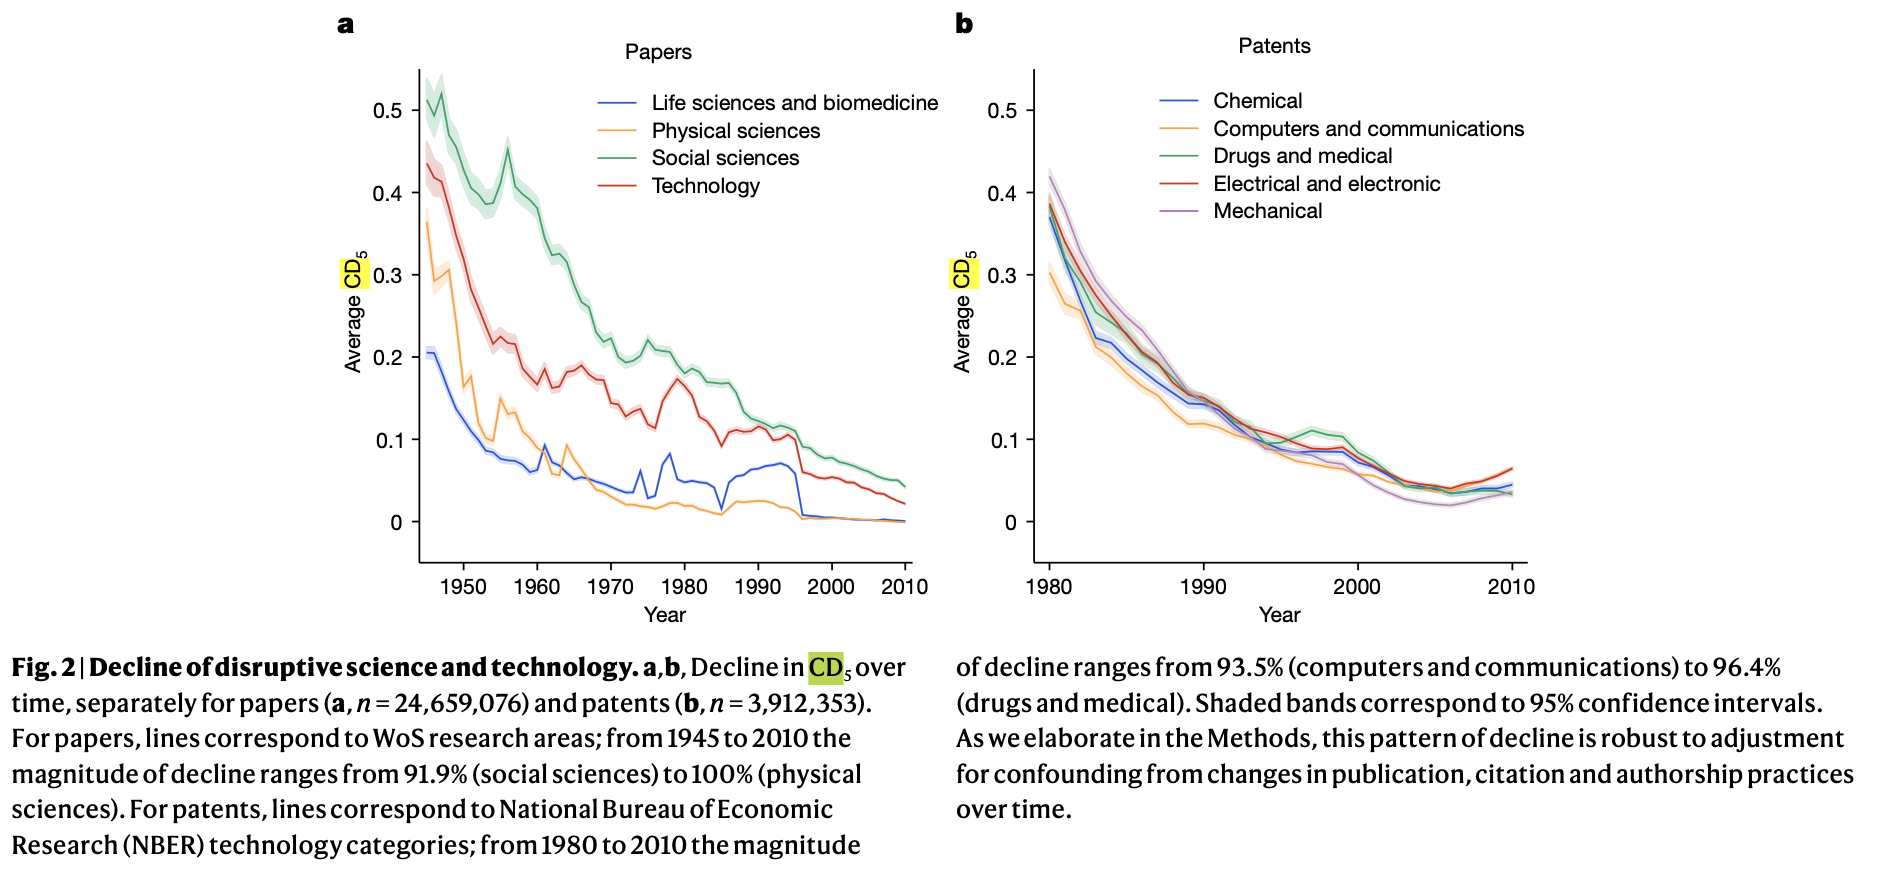 Fig. 2: Decline of disruptive science and technology. Description: a, b, Decline in CD5 over time, separately for papers (a, n = 24,659,076) and patents (b, n = 3,912,353). For papers, lines correspond to WoS research areas; from 1945 to 2010 the magnitude of decline ranges from 91.9% (social sciences) to 100% (physical sciences). For patents, lines correspond to National Bureau of Economic Research (NBER) technology categories; from 1980 to 2010 the magnitude of decline ranges from 93.5% (computers and communications) to 96.4% (drugs and medical). Shaded bands correspond to 95% confidence intervals. As we elaborate in the Methods, this pattern of decline is robust to adjustment for confounding from changes in publication, citation and authorship practices over time.